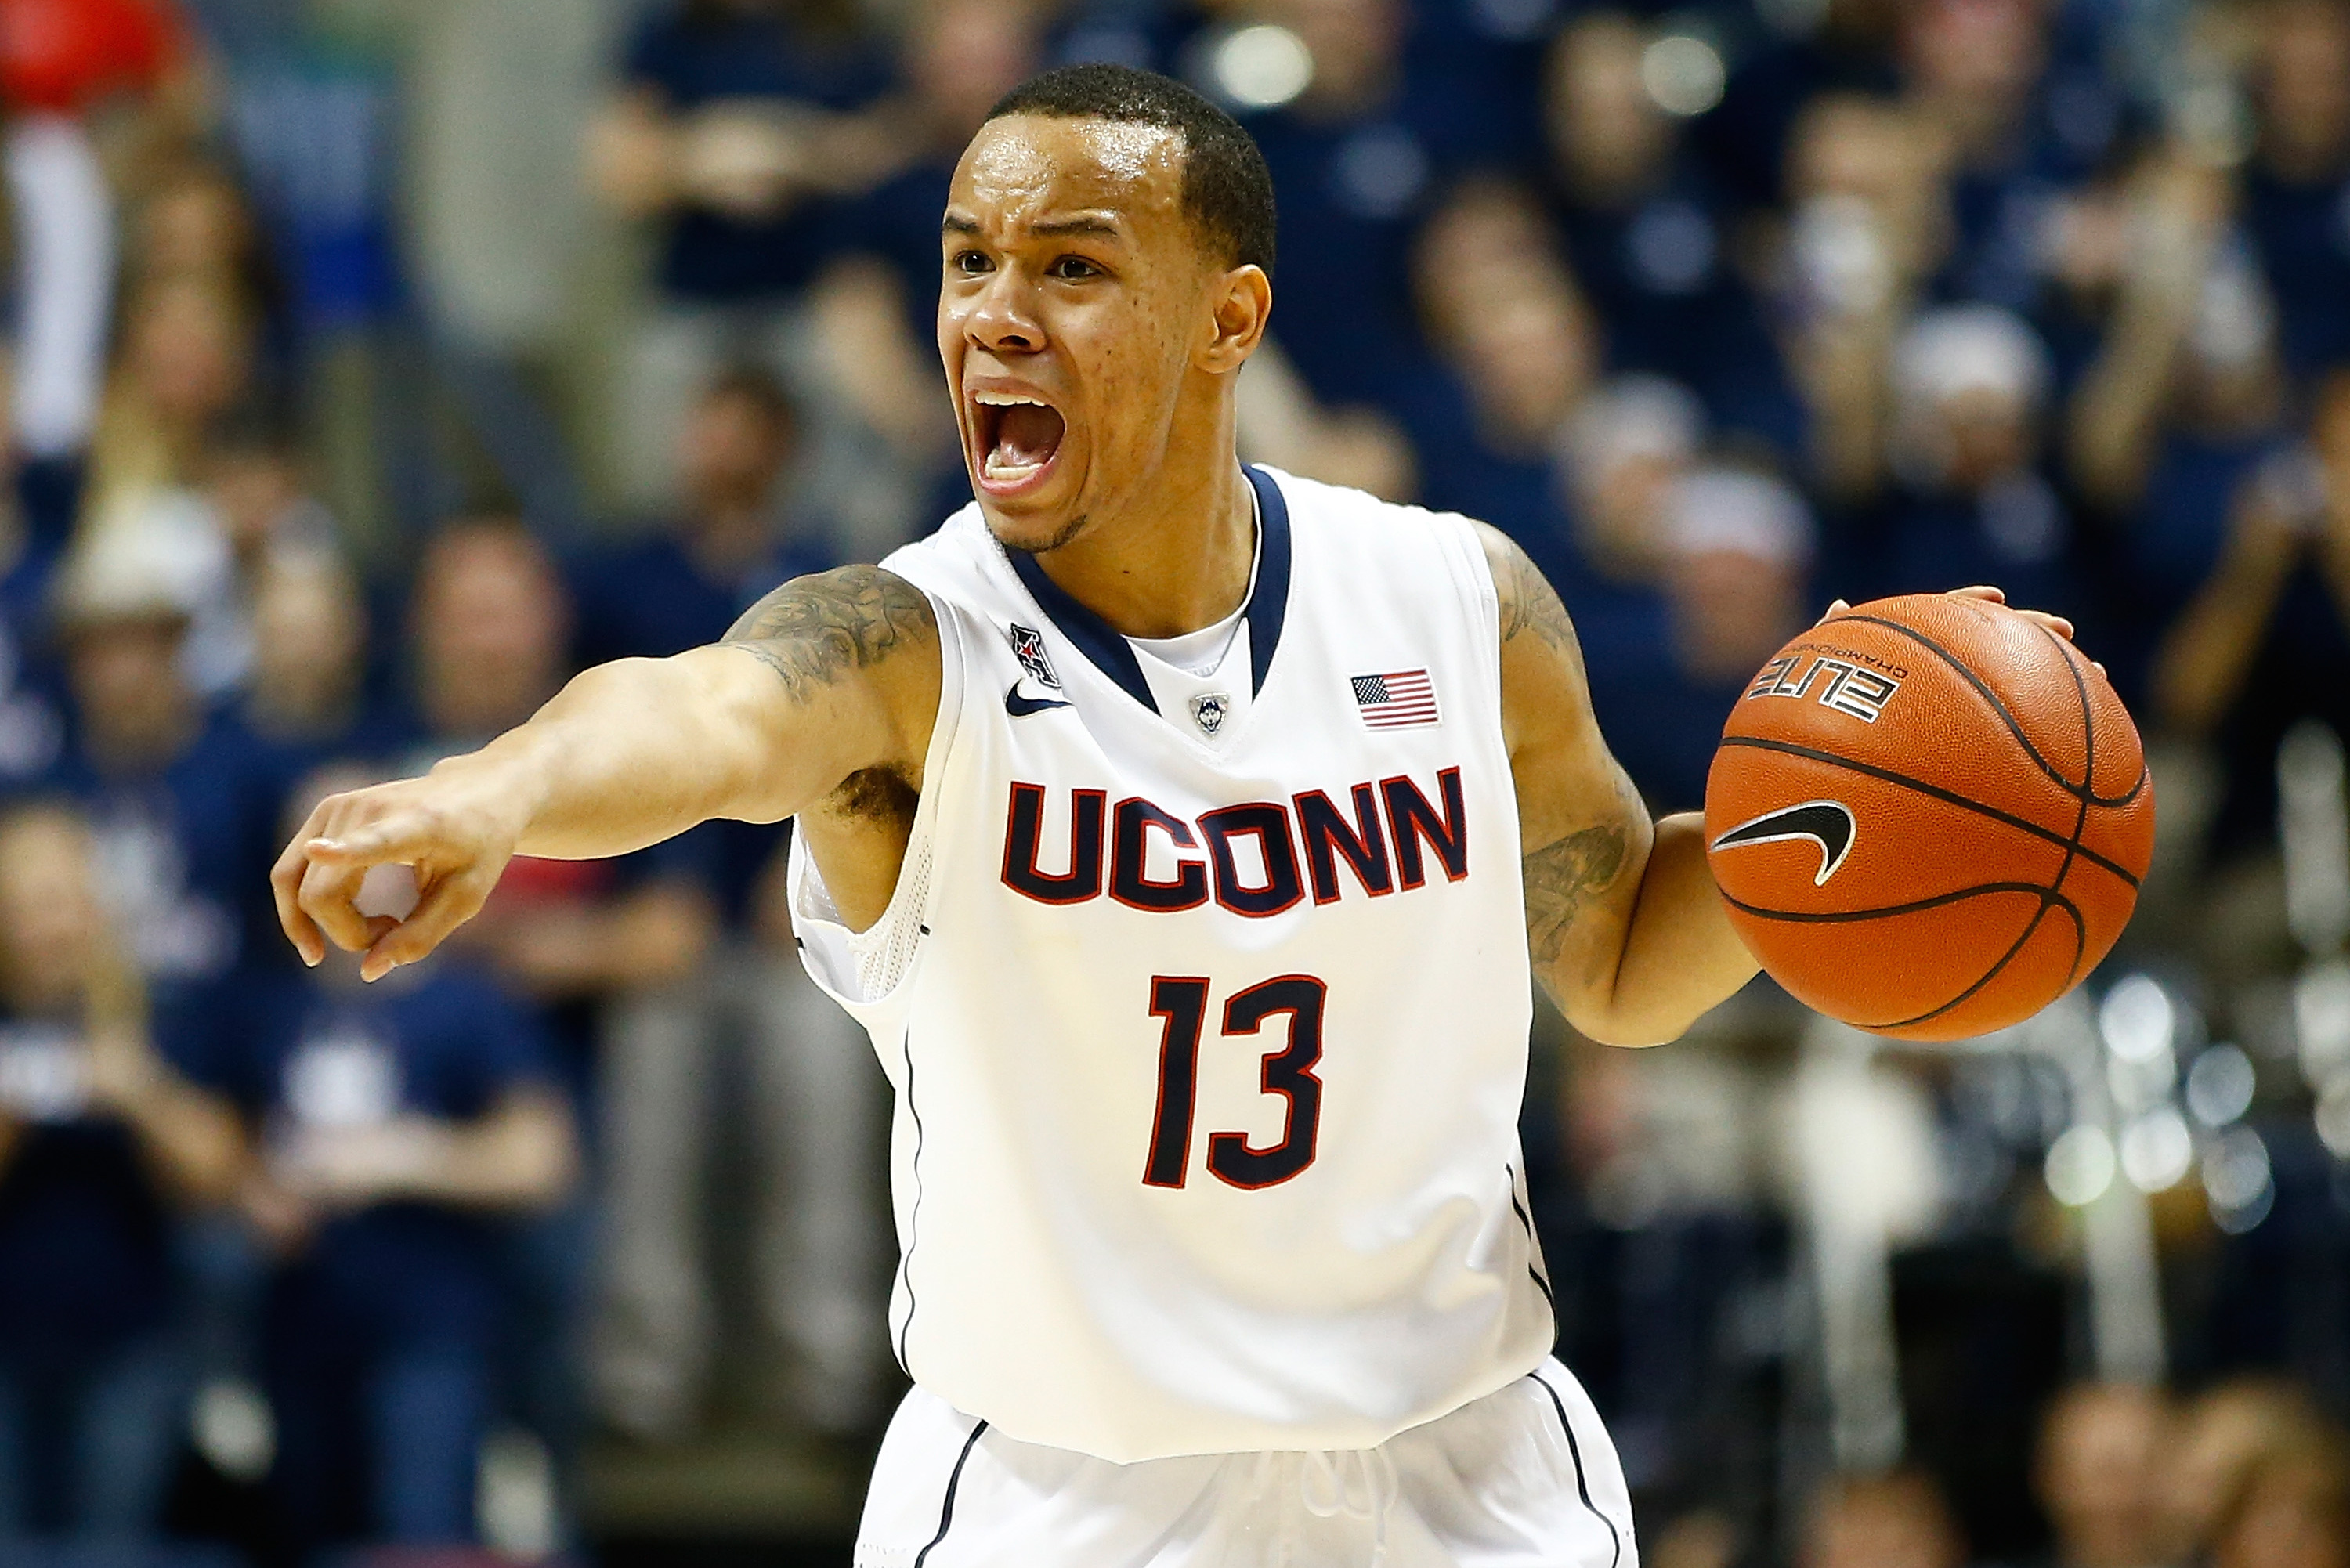 Roundup: Shabazz Napier gives UConn a messy win - The Boston Globe